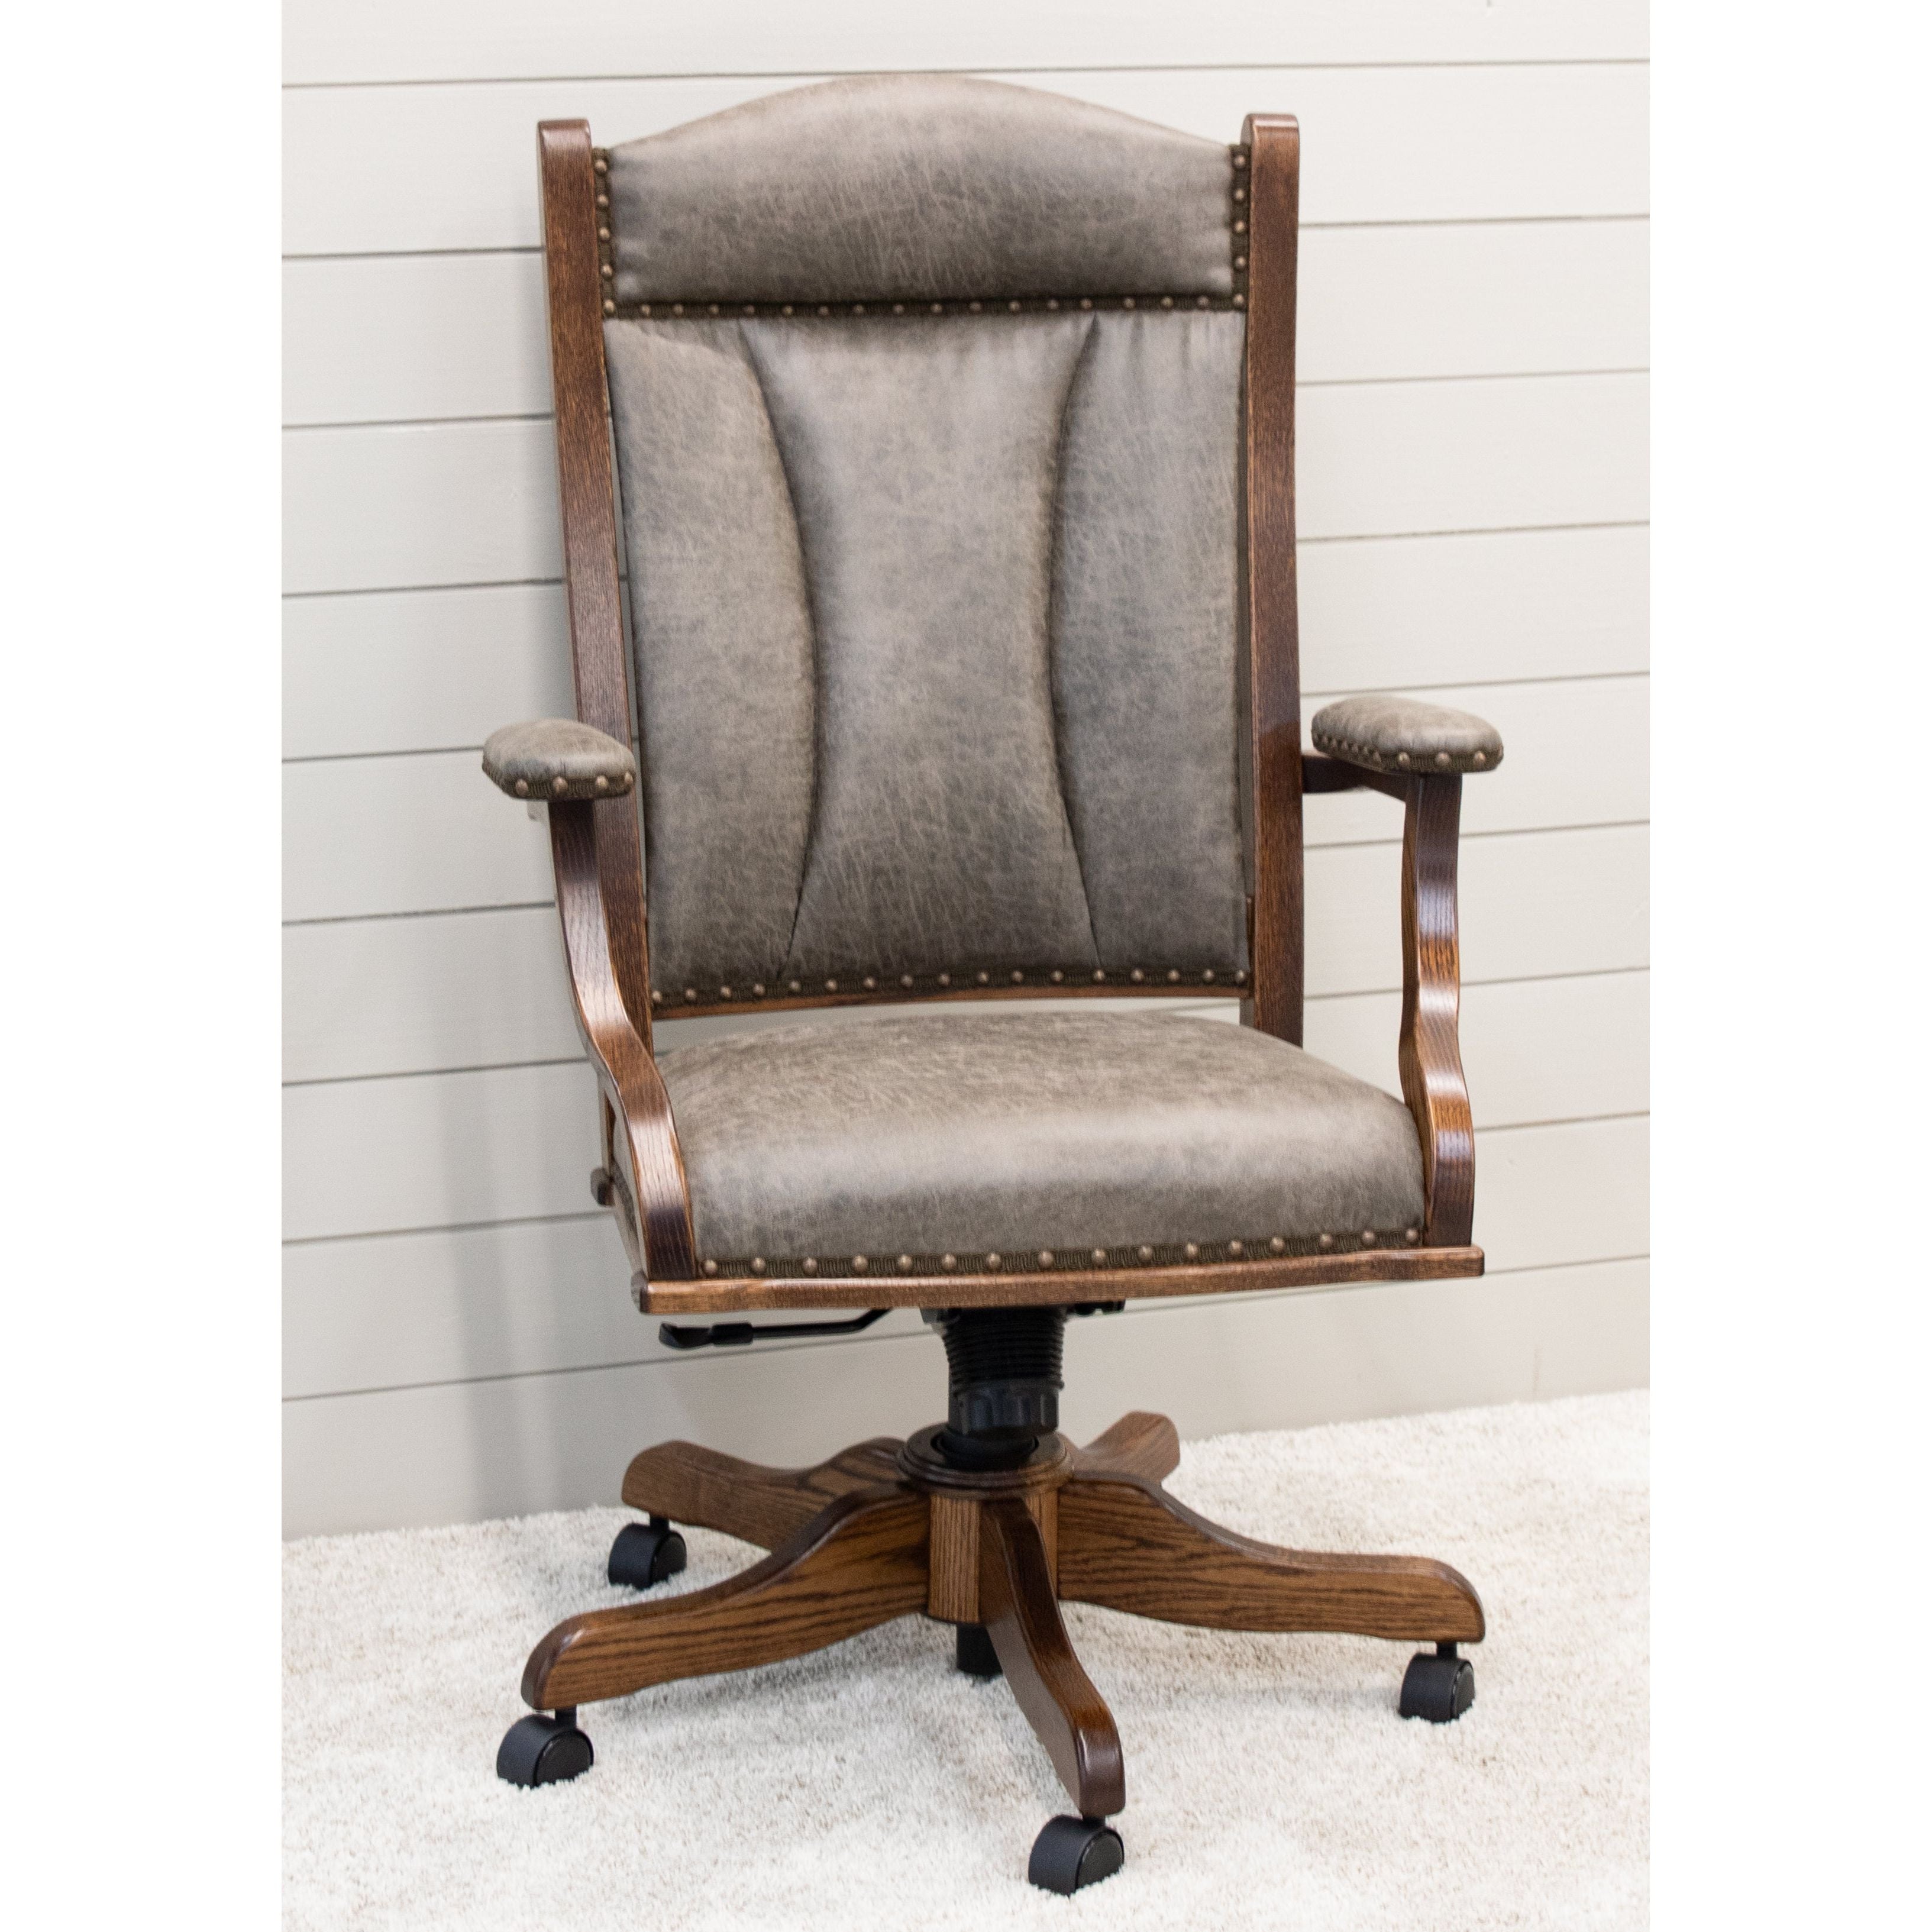 DC55 Office Chair